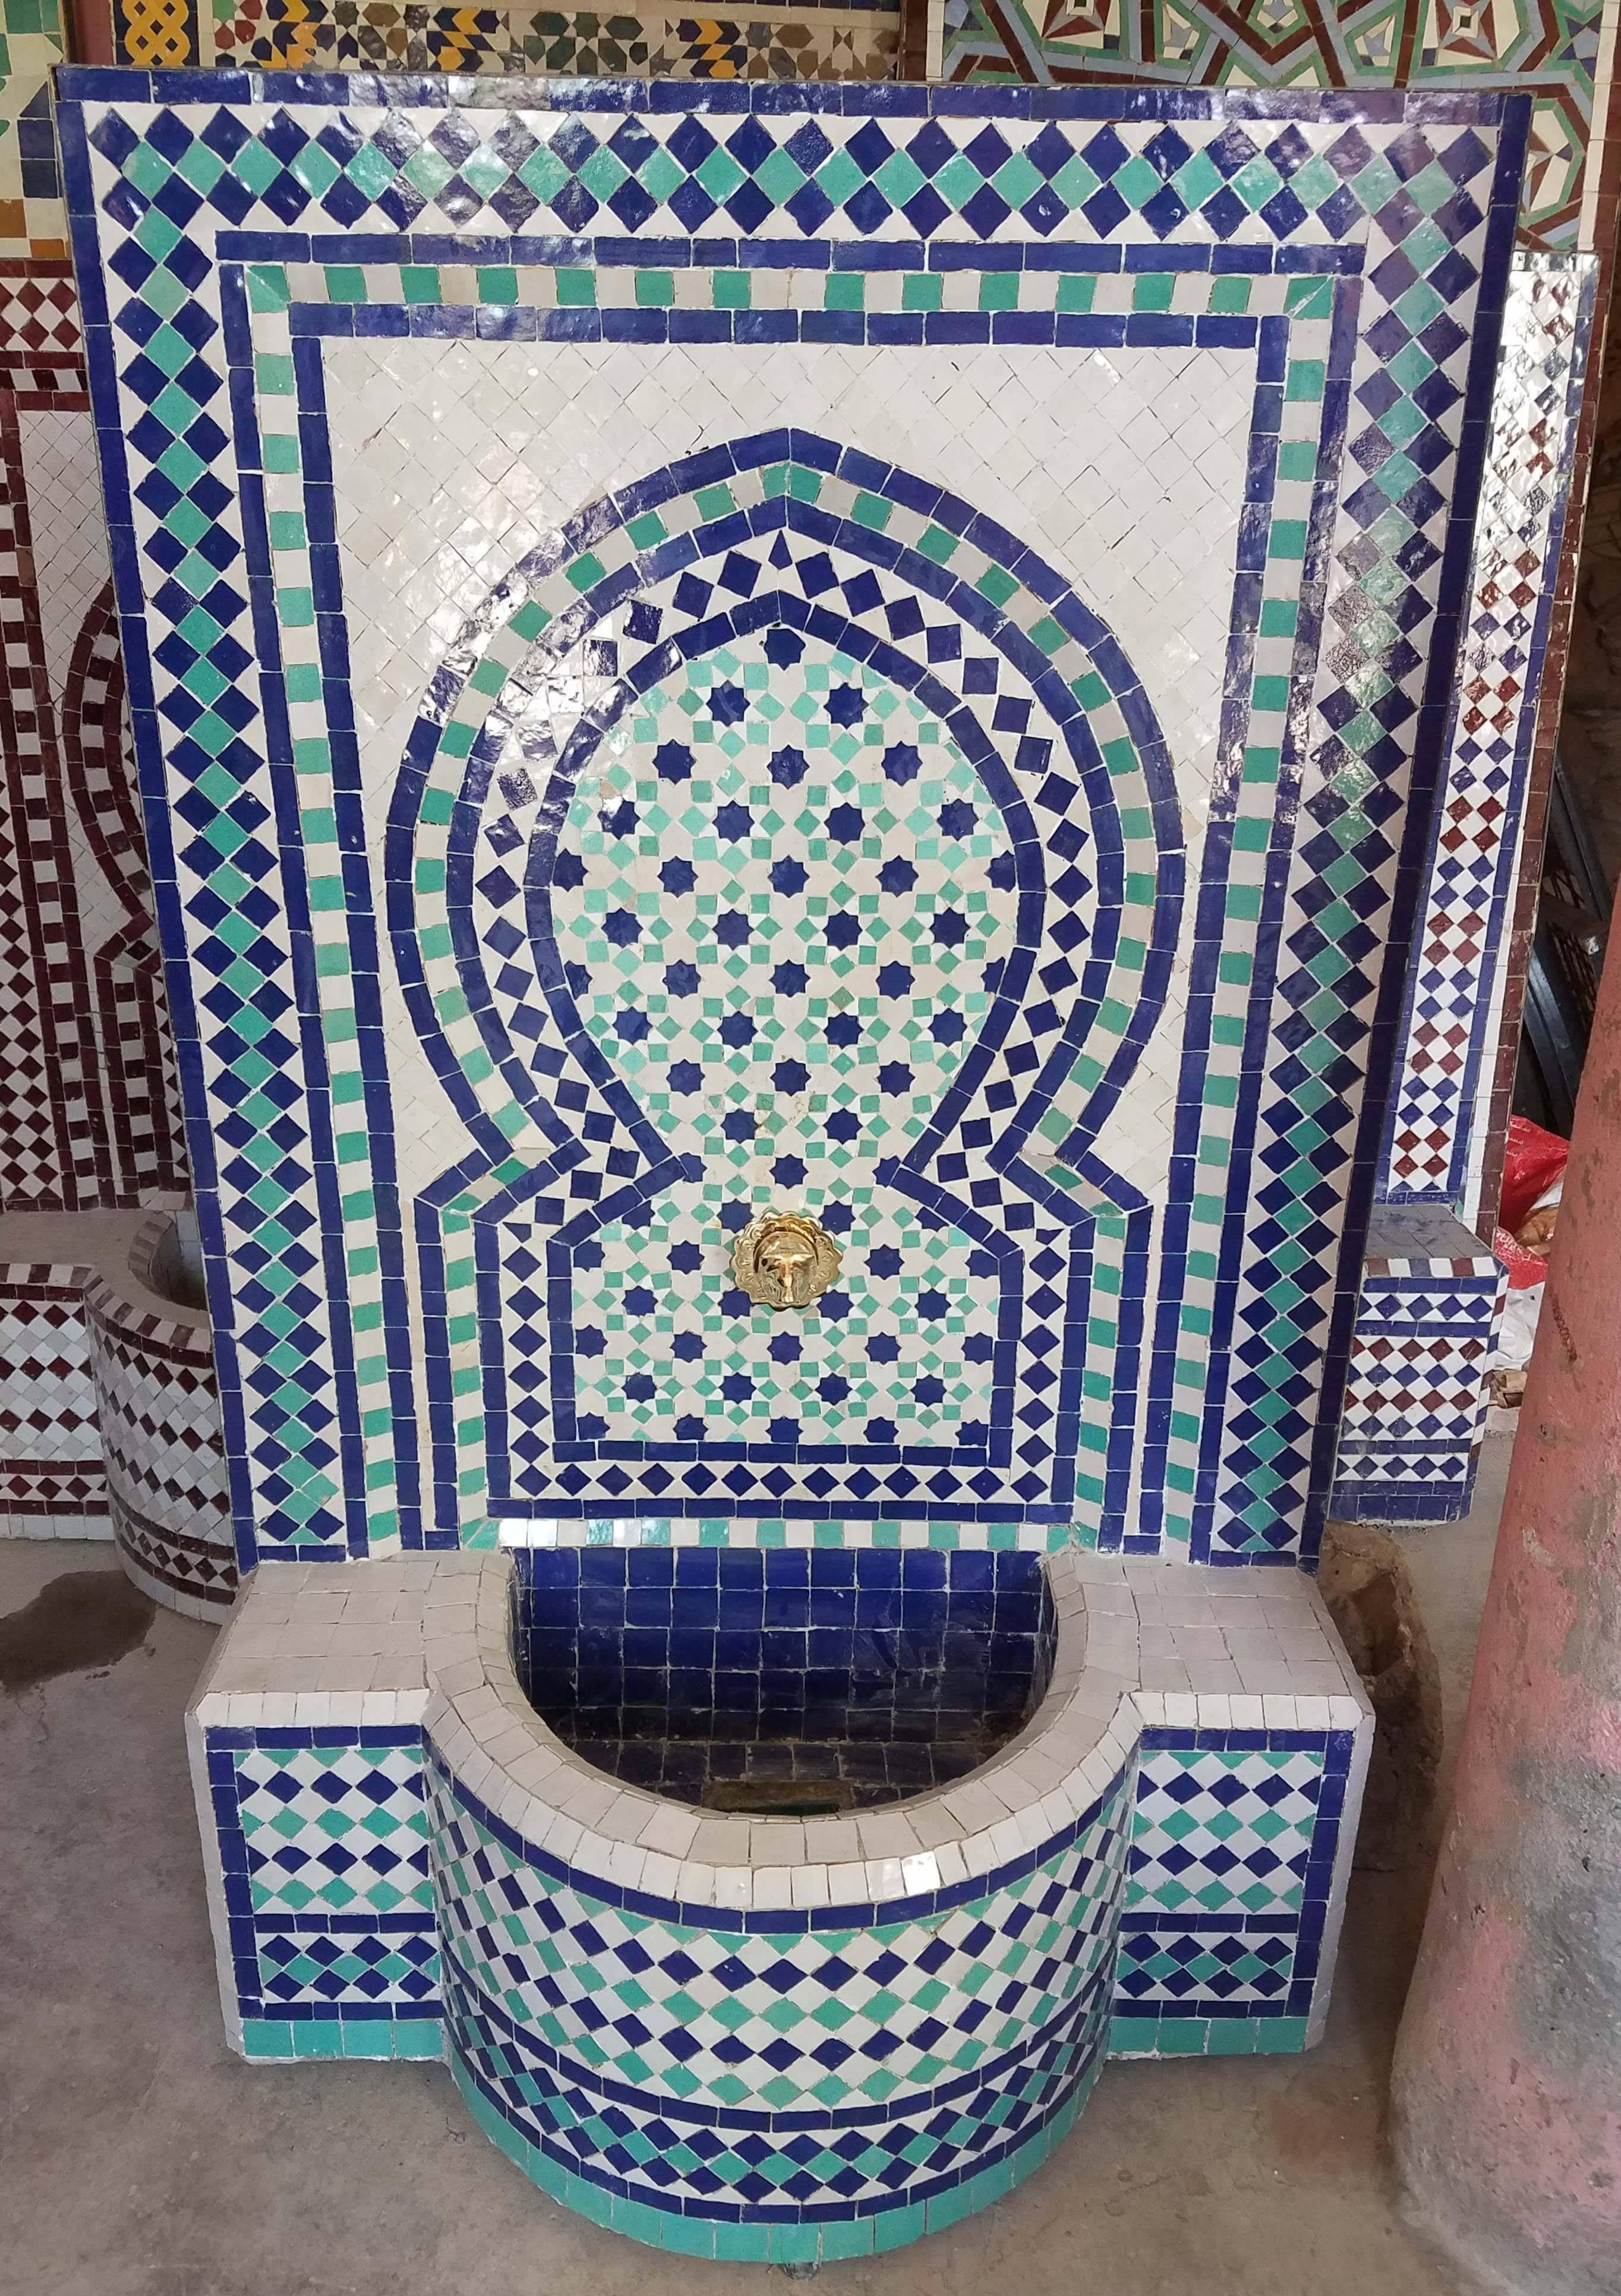 Aqua White and Blue Moroccan Mosaic Table, Garden or Indoors 2